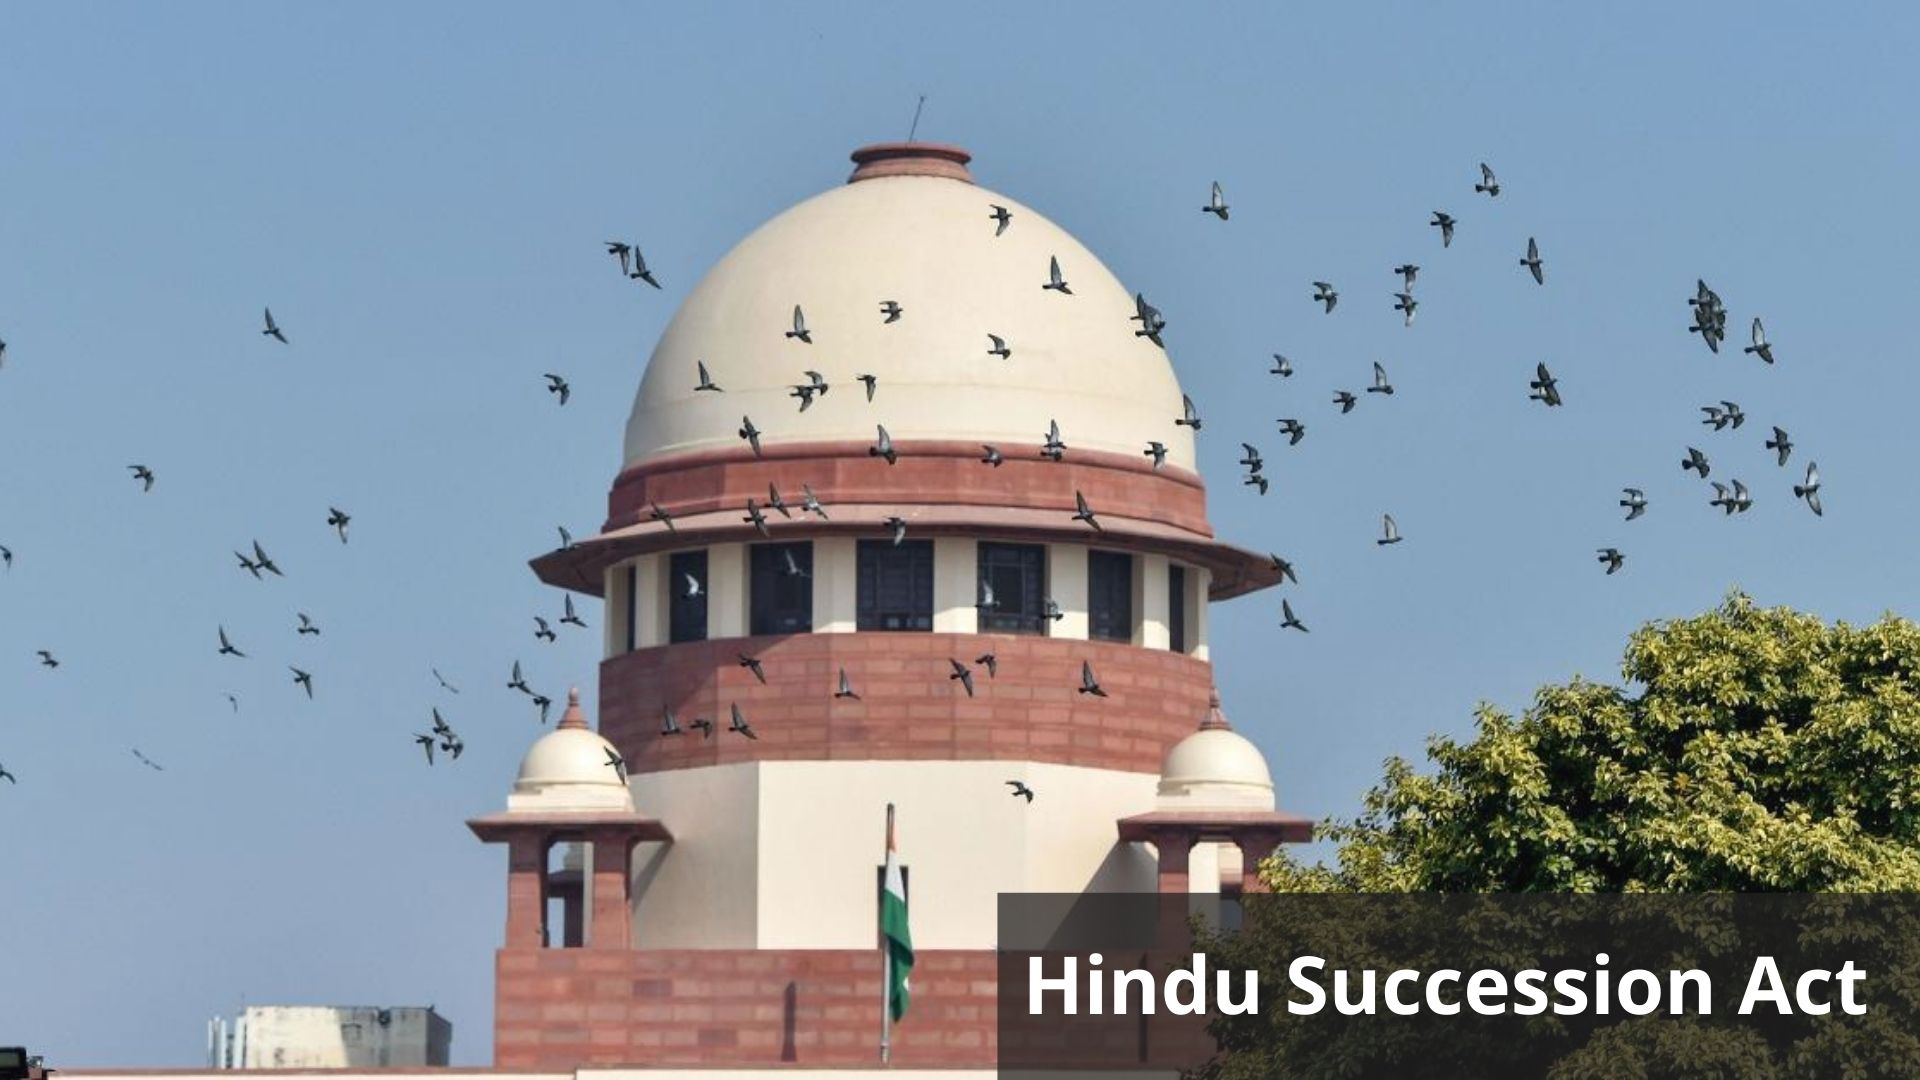 Daughters have Equal right under Hindu Succession Act even if born before 2005: Supreme Court